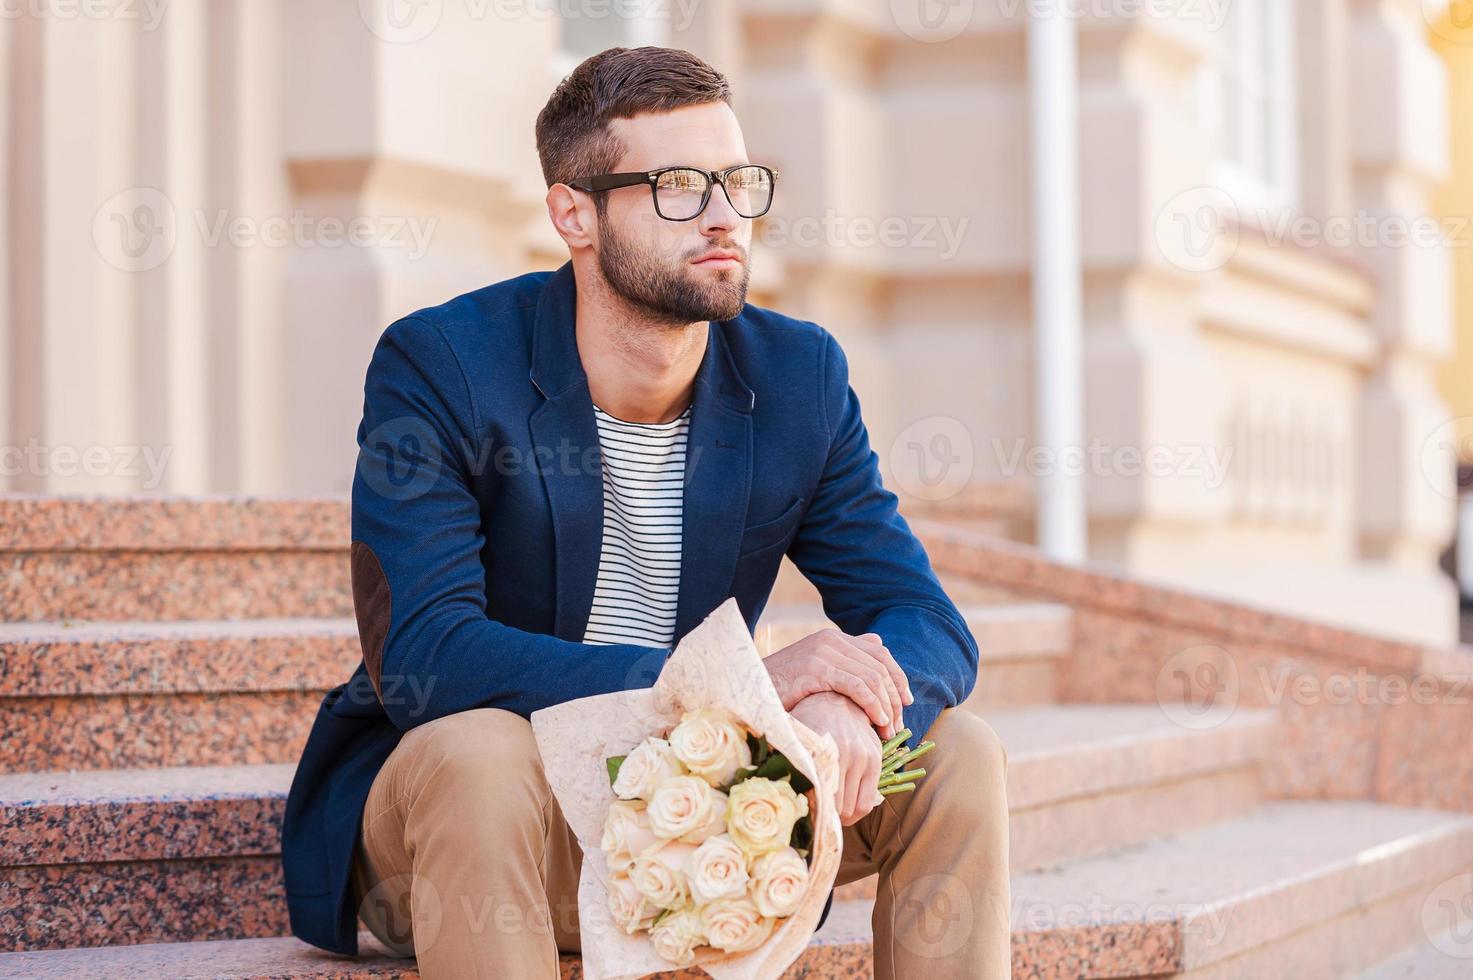 Waiting for her. Handsome young man in smart jacket holding bouquet of flowers and looking away while sitting on the staircase near the house photo